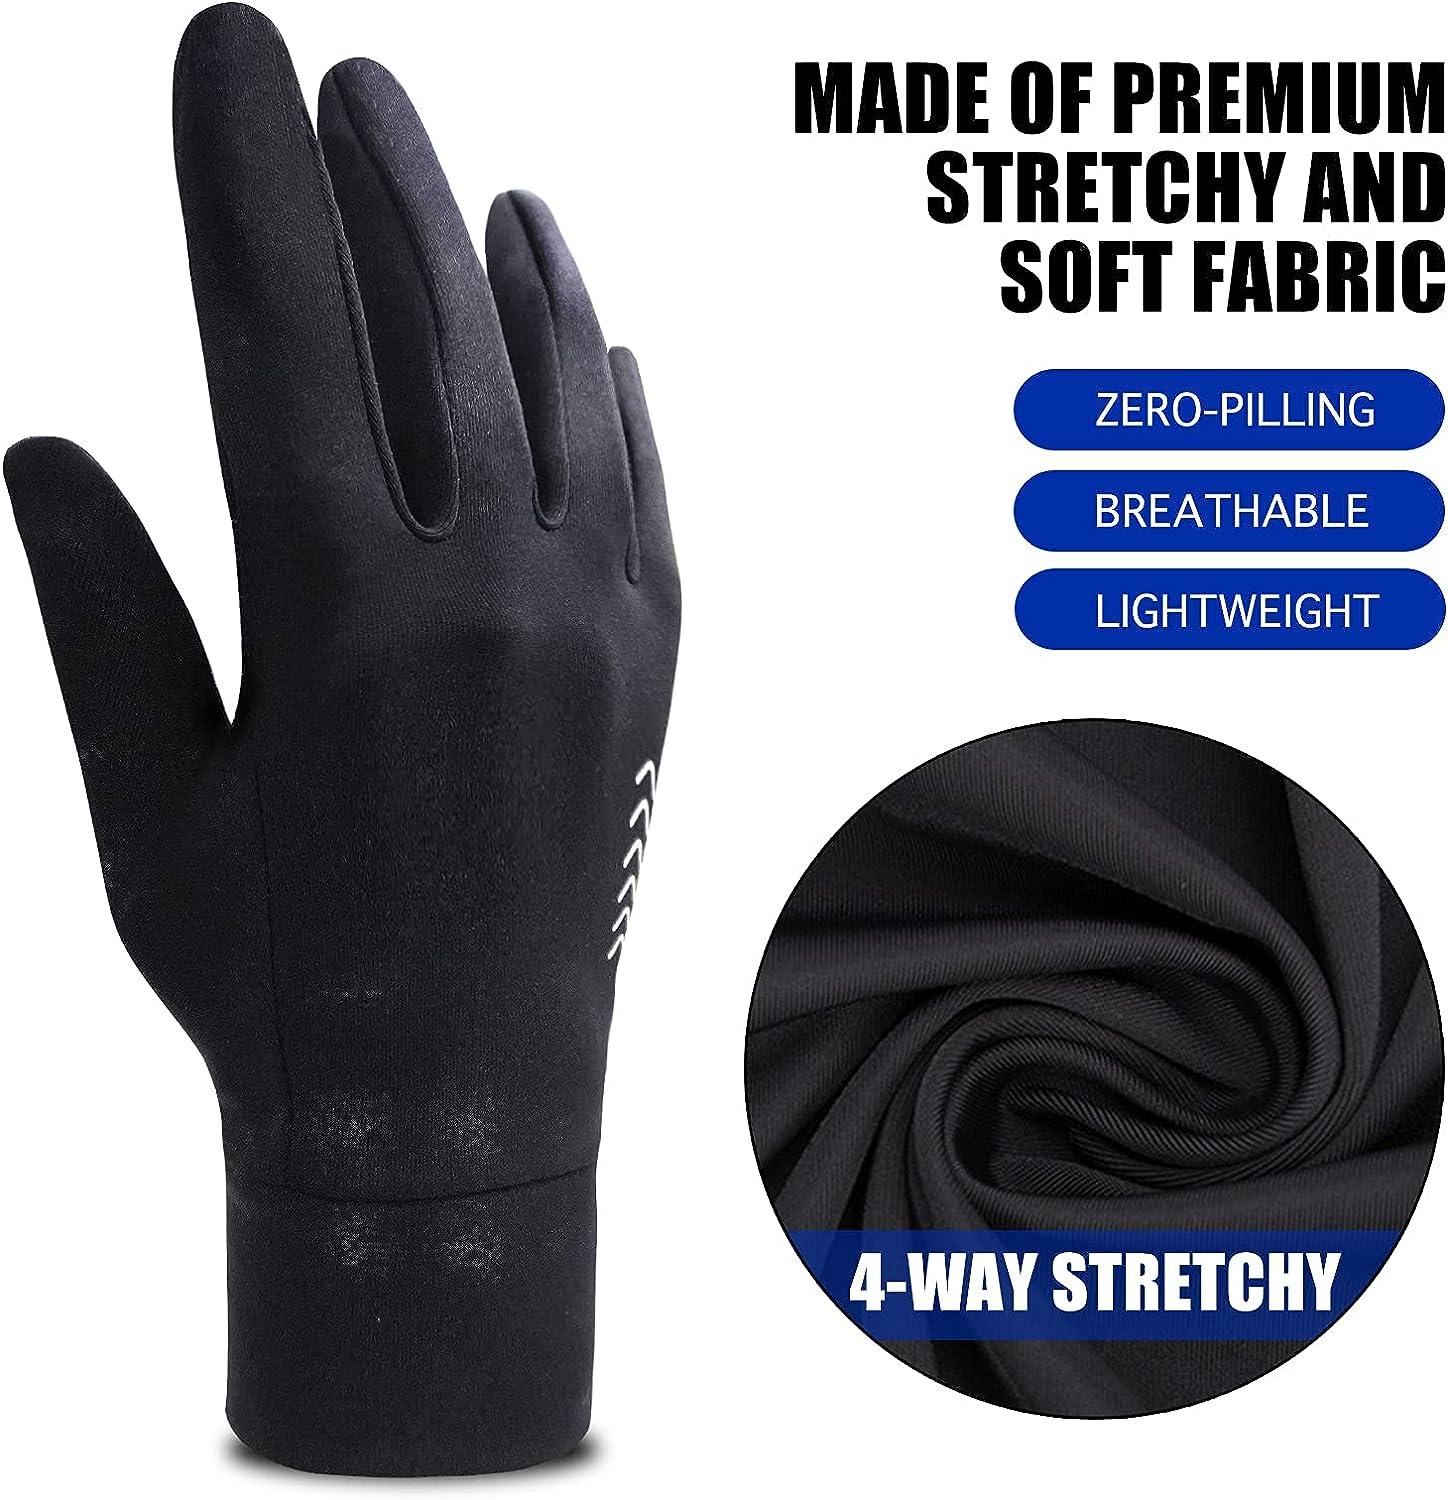 Winter Touchscreen Waterproof Neoprene Gloves -Multiple Colors Available S in Dark Blue | Small